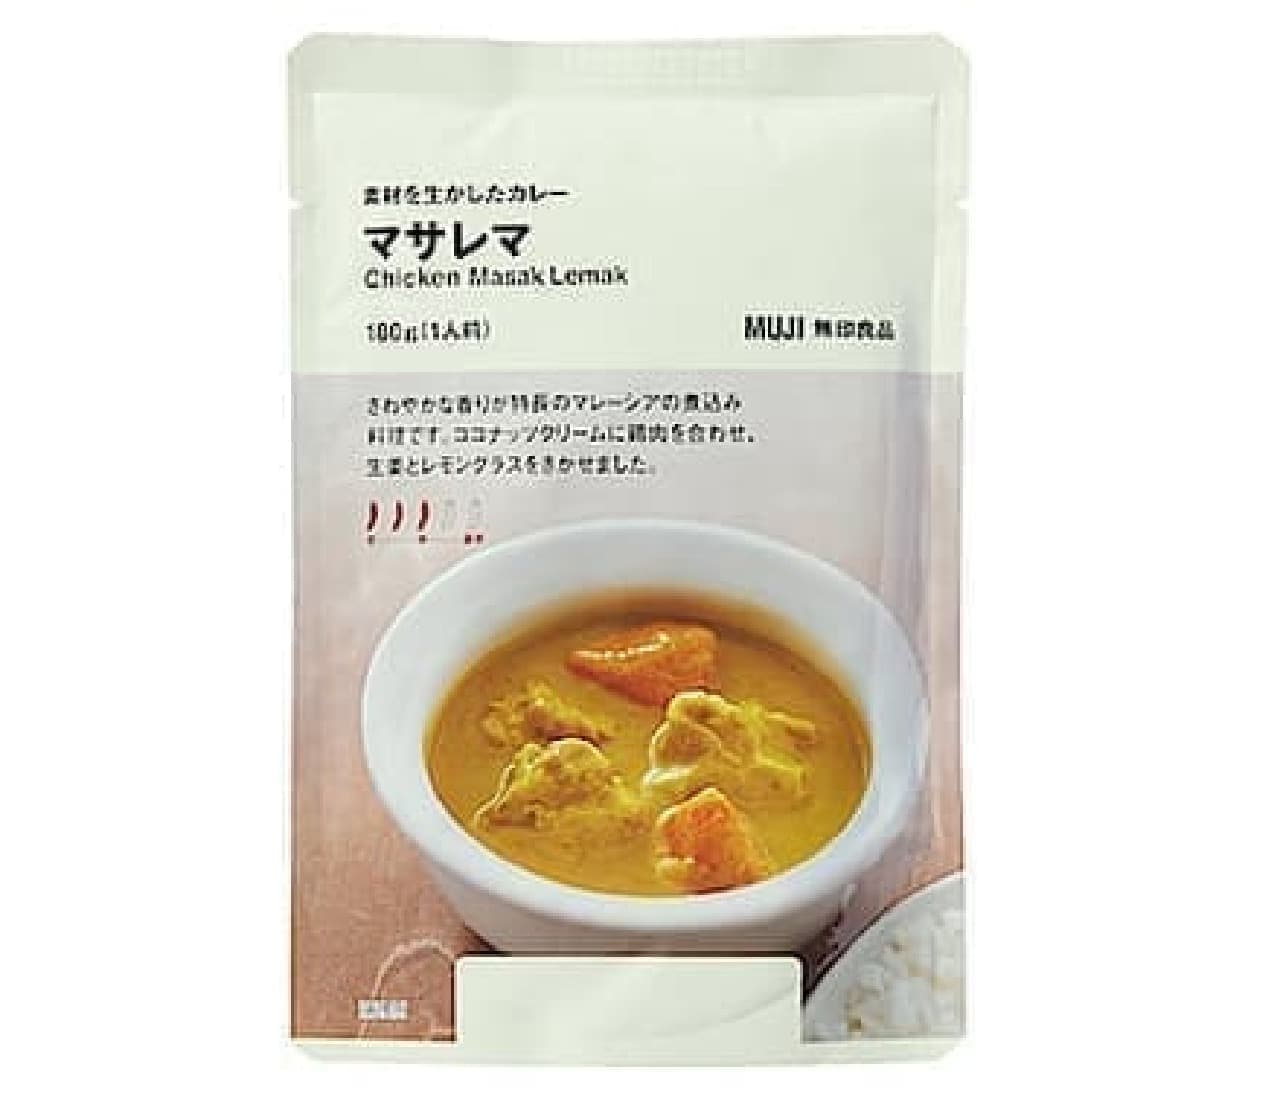 MUJI "Curry with the best ingredients, Masarema".